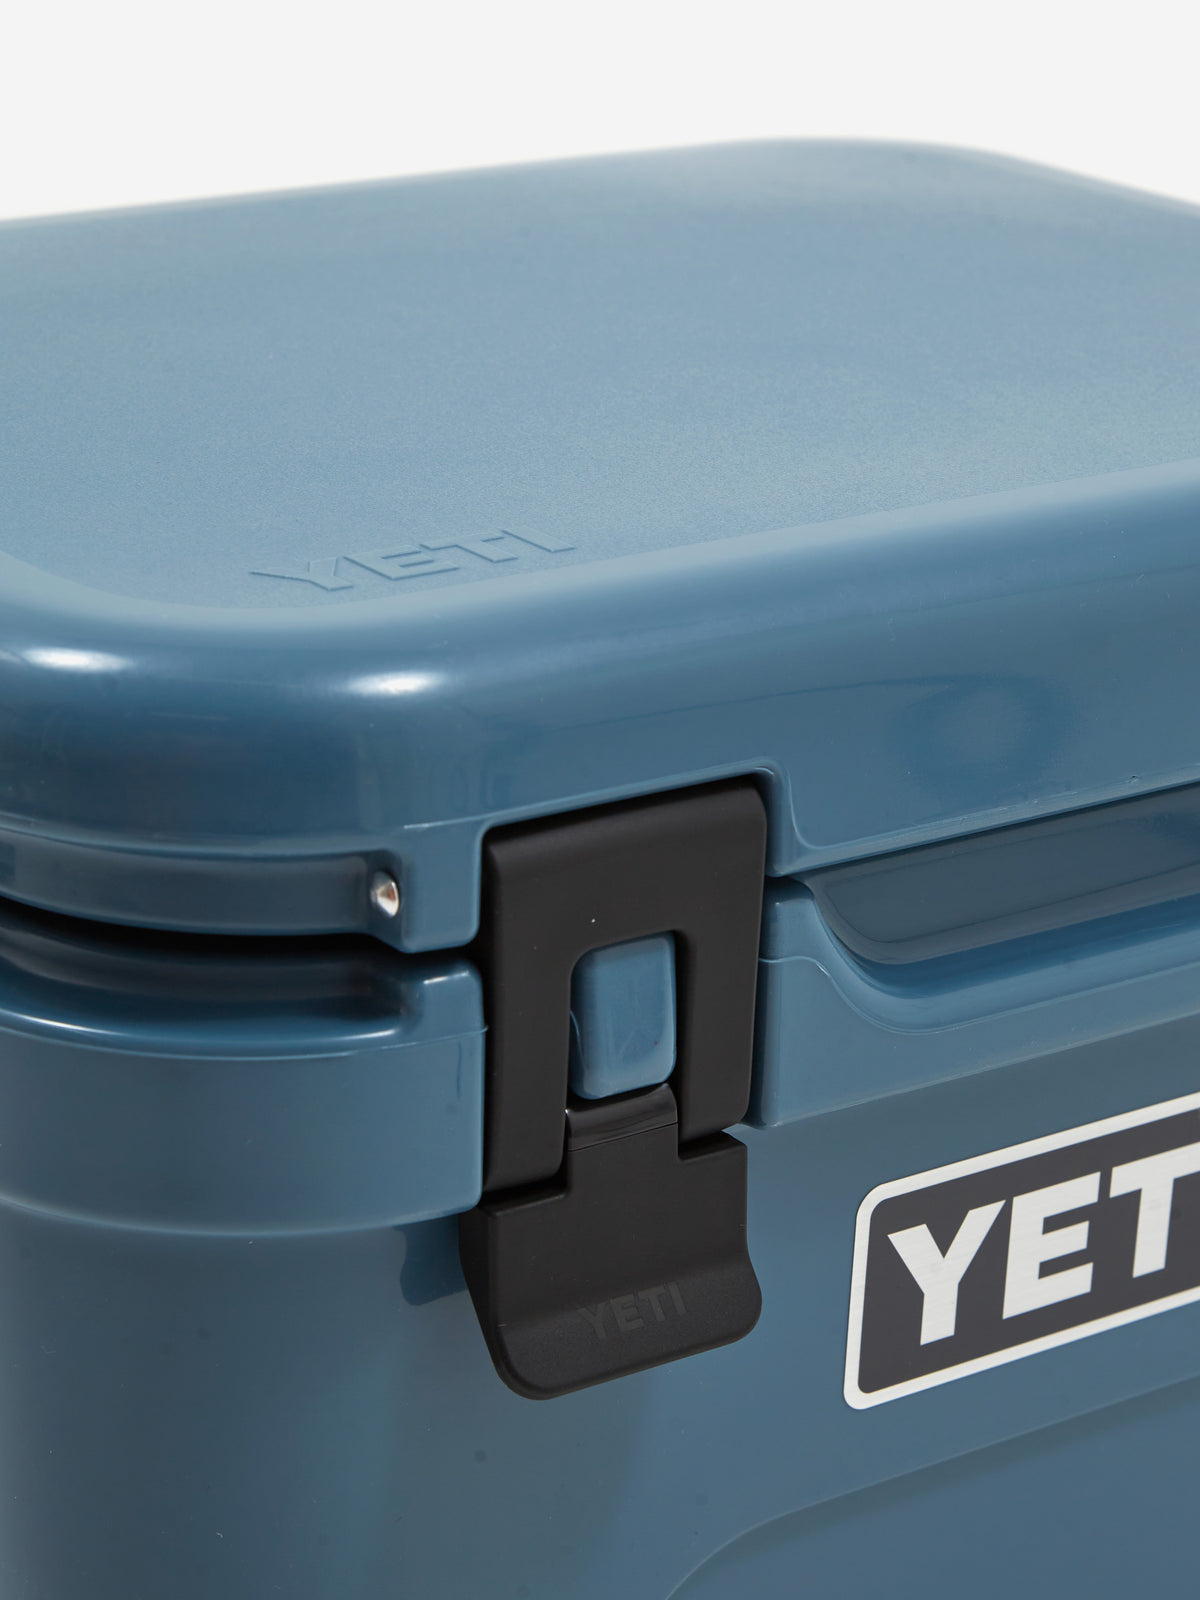 https://www.goodhoodstore.shop/wp-content/uploads/1692/13/find-great-online-shopping-at-affordable-prices-using-yeti-roadie-24-nordic-blue-yeti_3.jpg